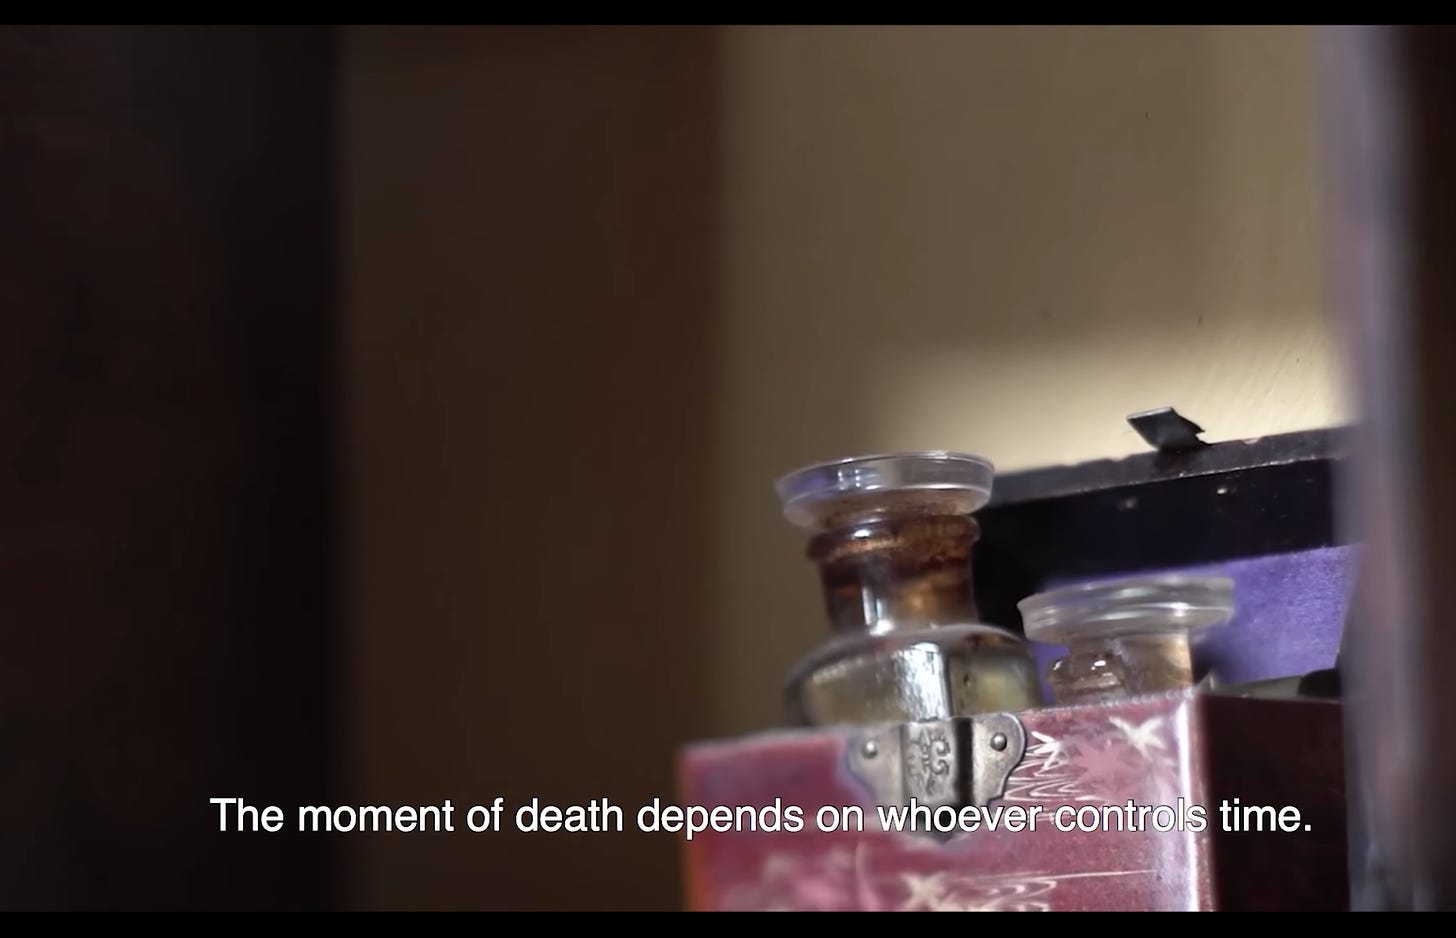 A film still with a closed caption that reads "The moment of death depends on whoever controls time." IN the background is a chest with two medicine bottles sticking out of the top.